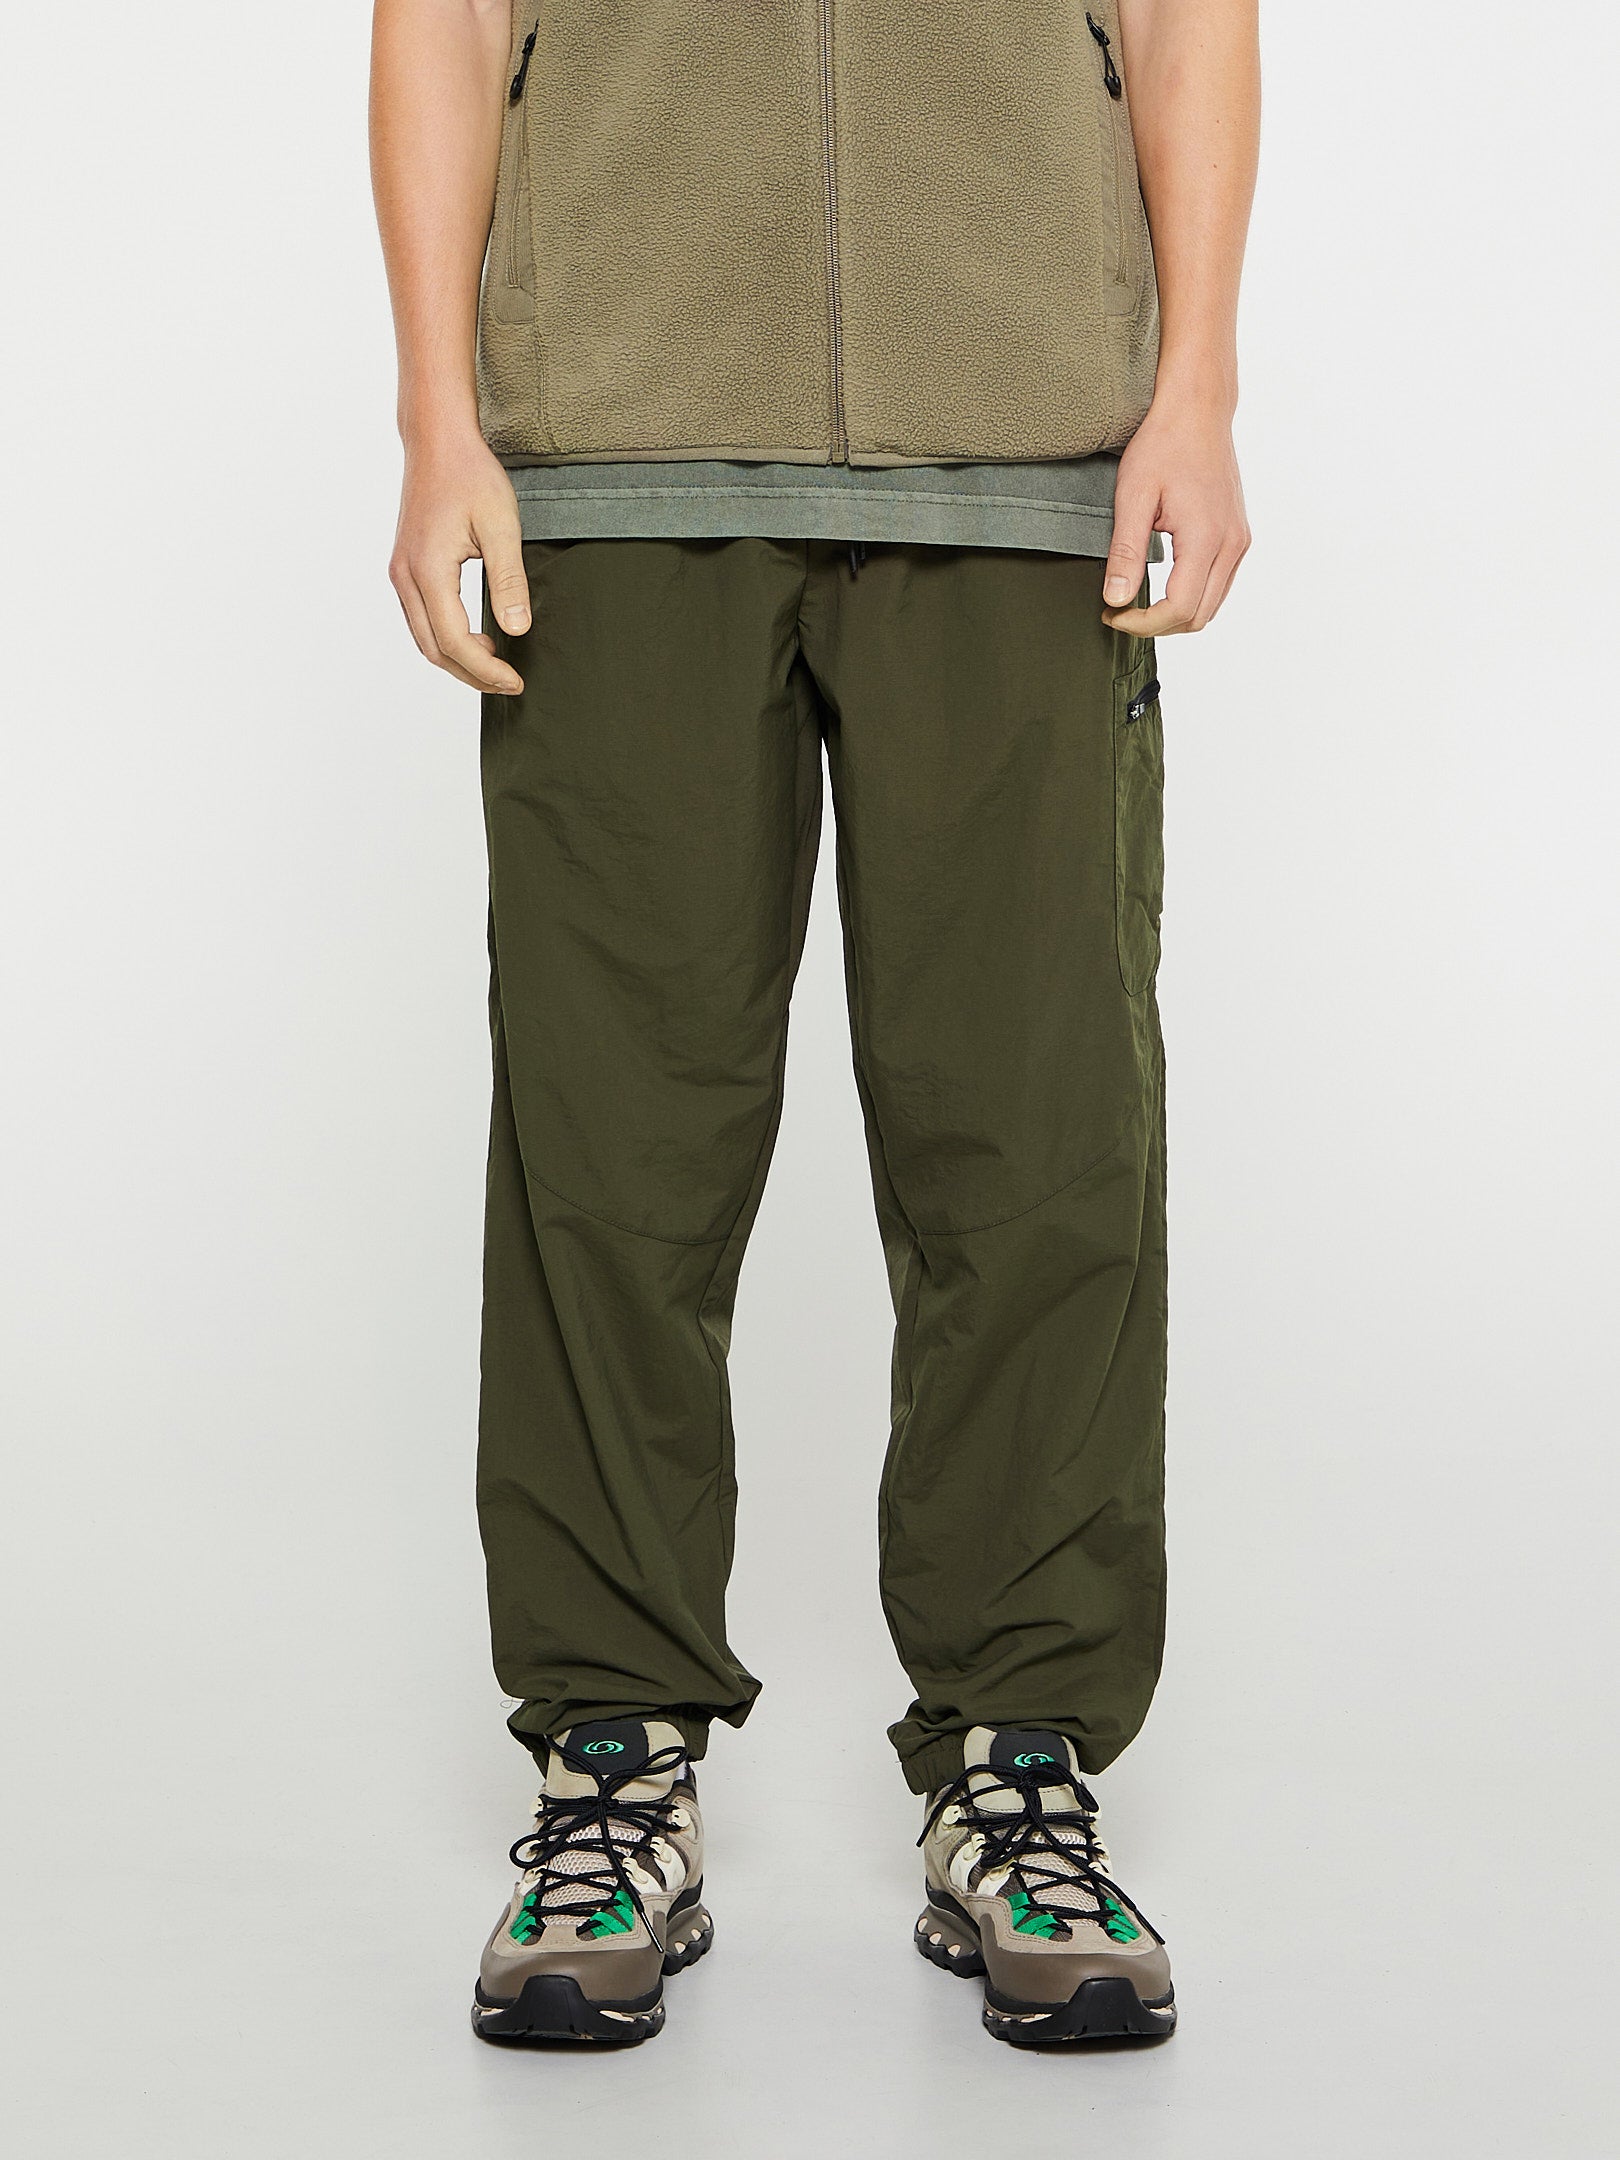 Halo - Combat Pants in Forest Night